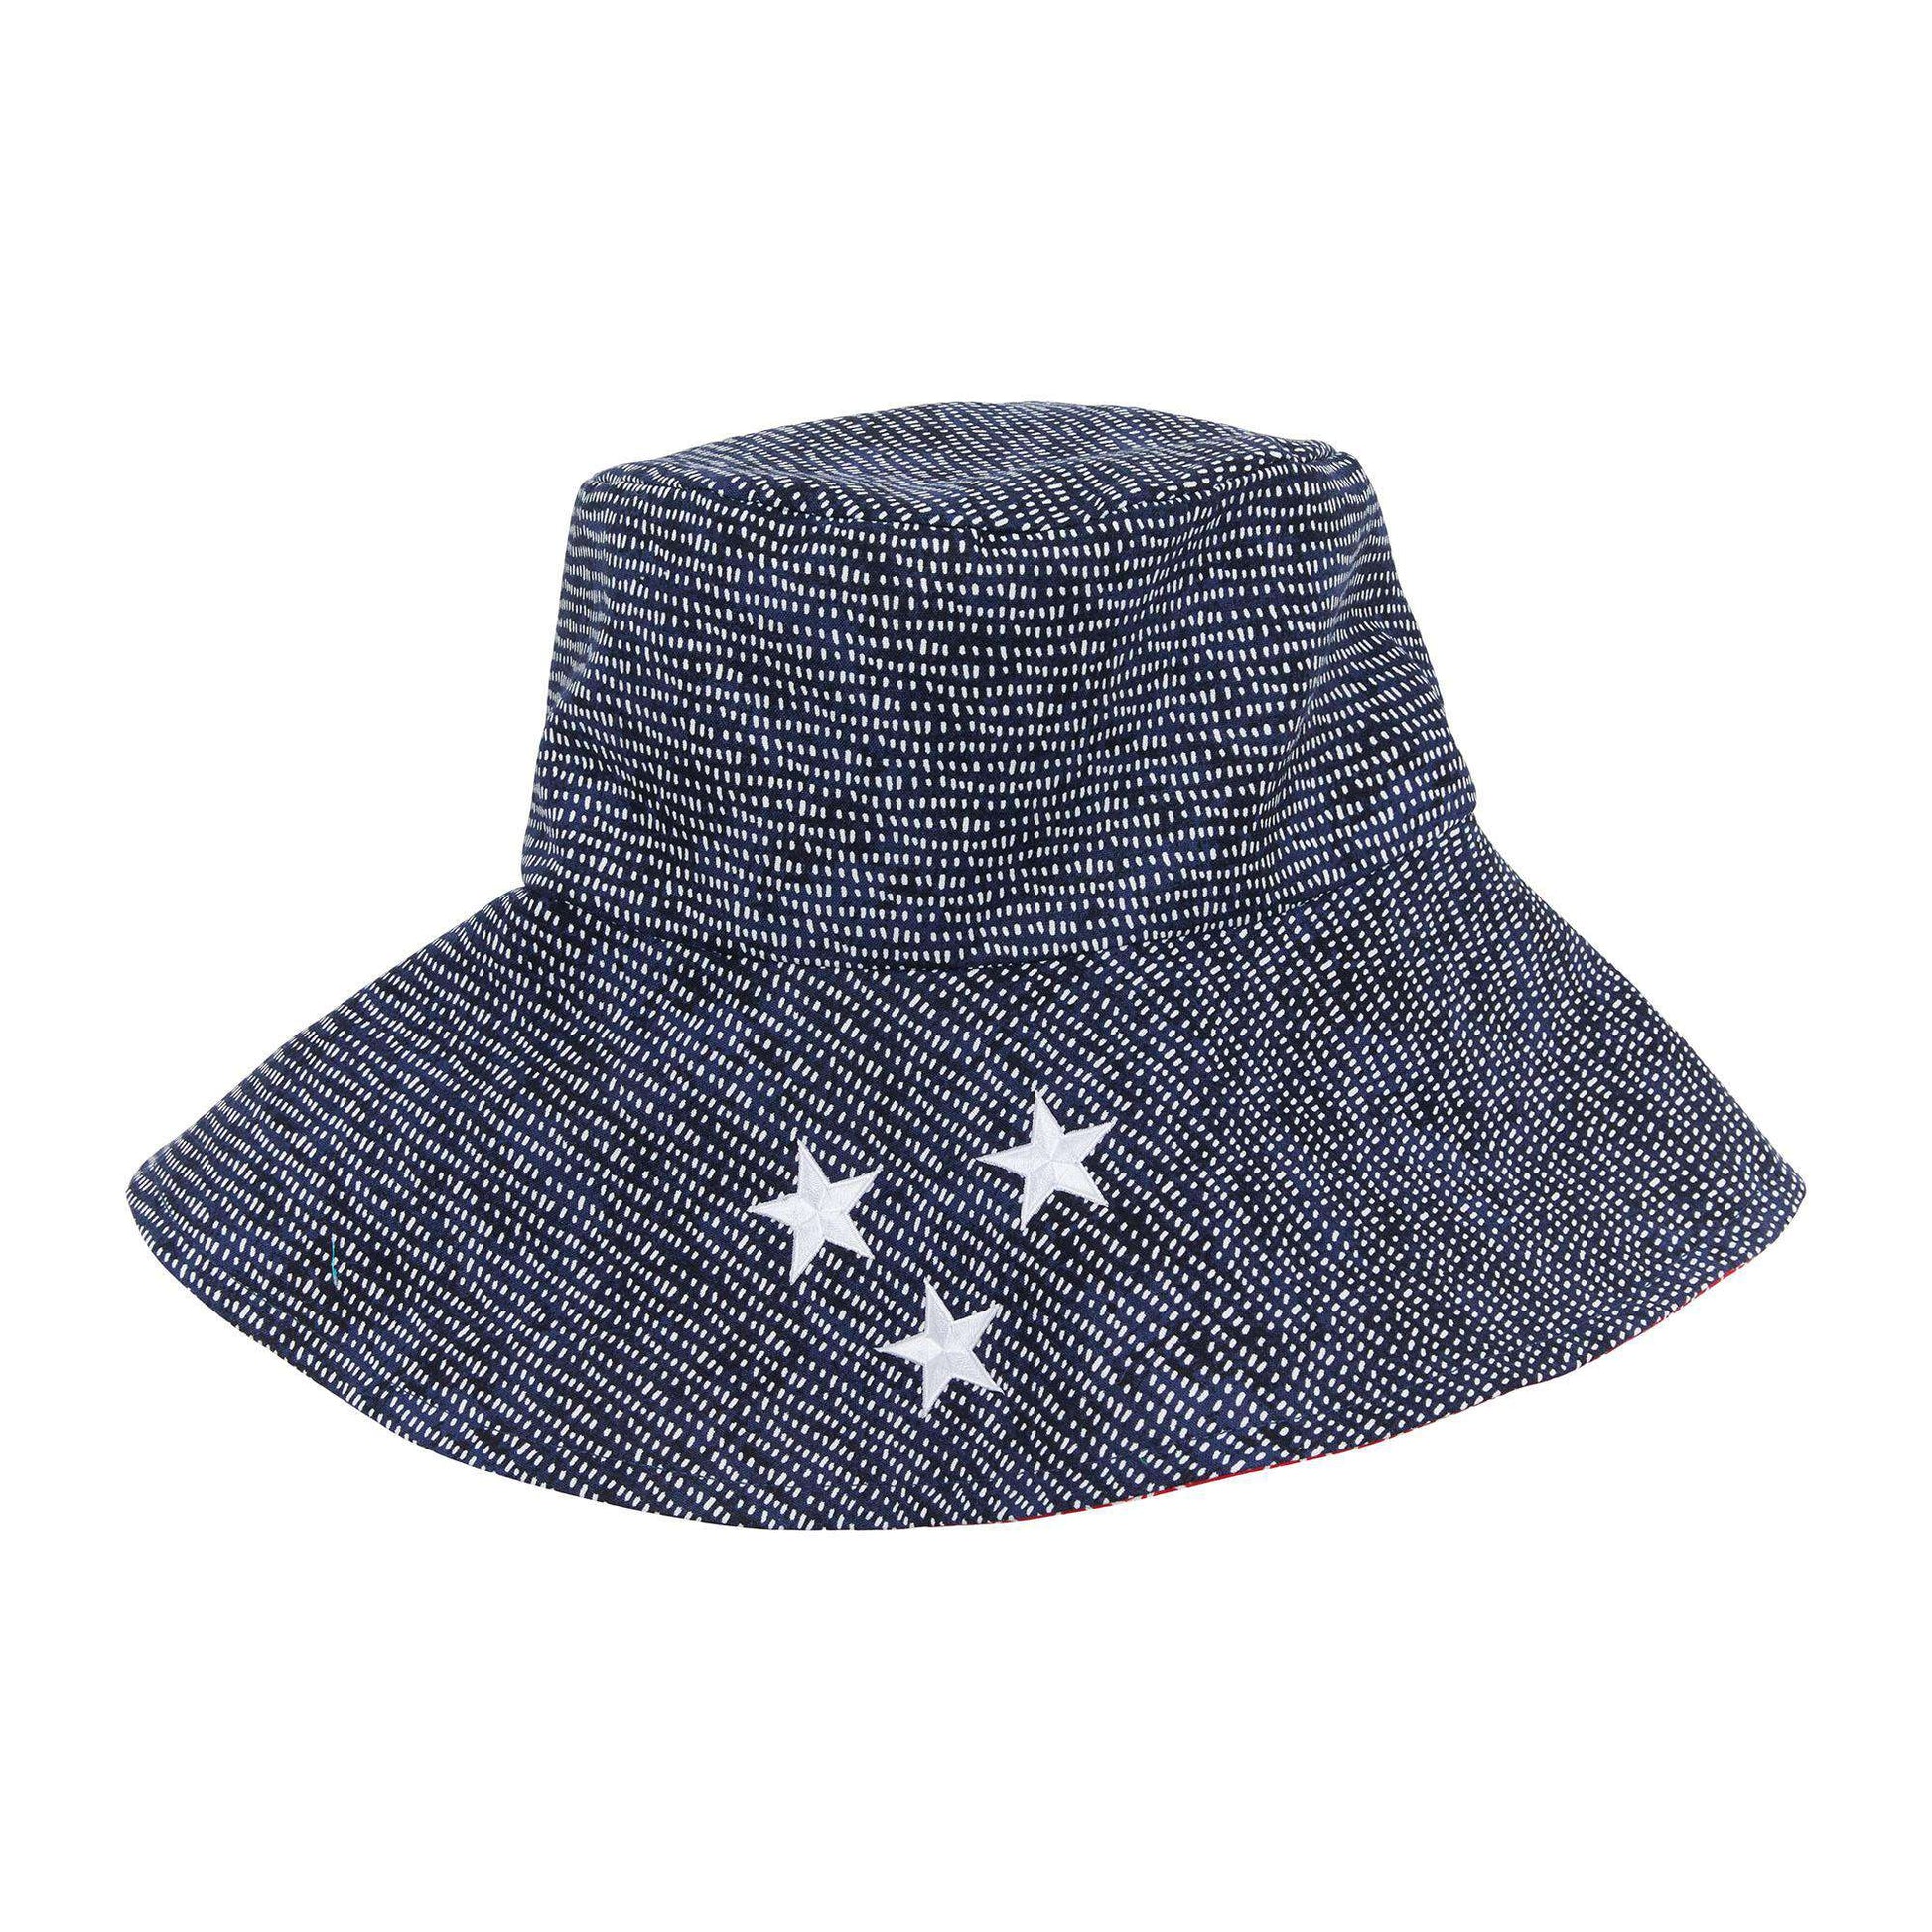 Free Coats Sewing And Clark Bucket Summer Hat Pattern